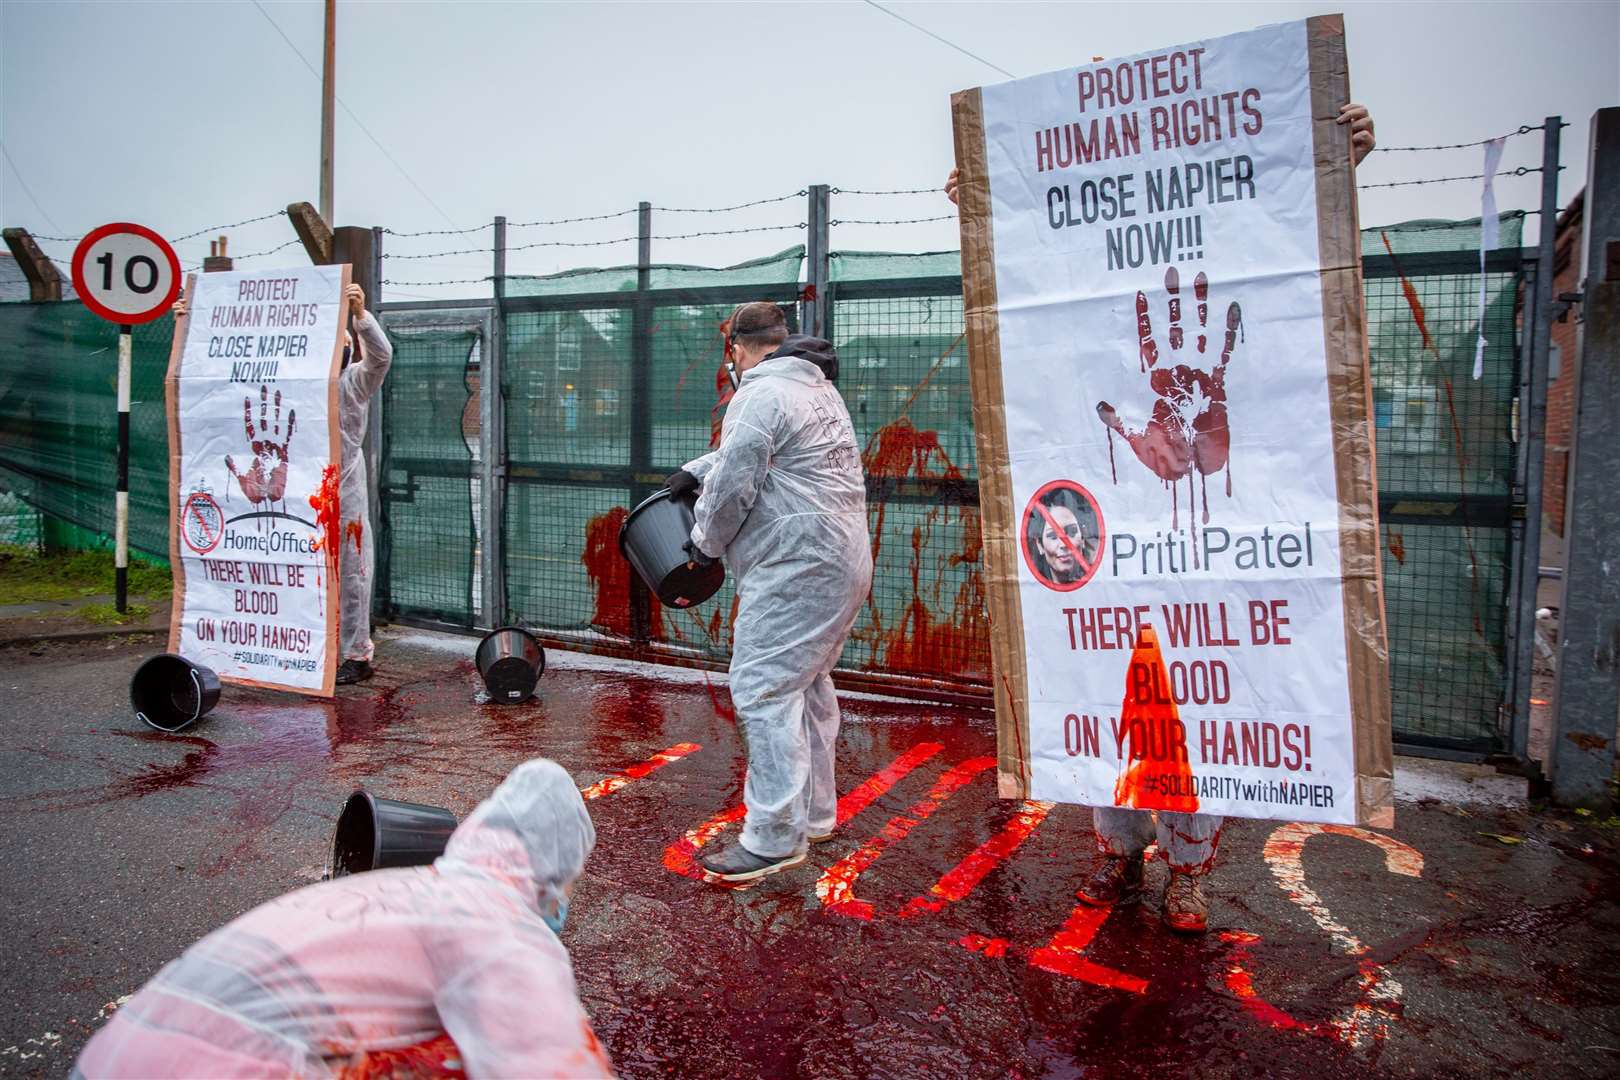 Activists took radical action in January to "highlight human rights violations" at the barracks. Picture: Andrew Aitchison/In pictures via Getty Images